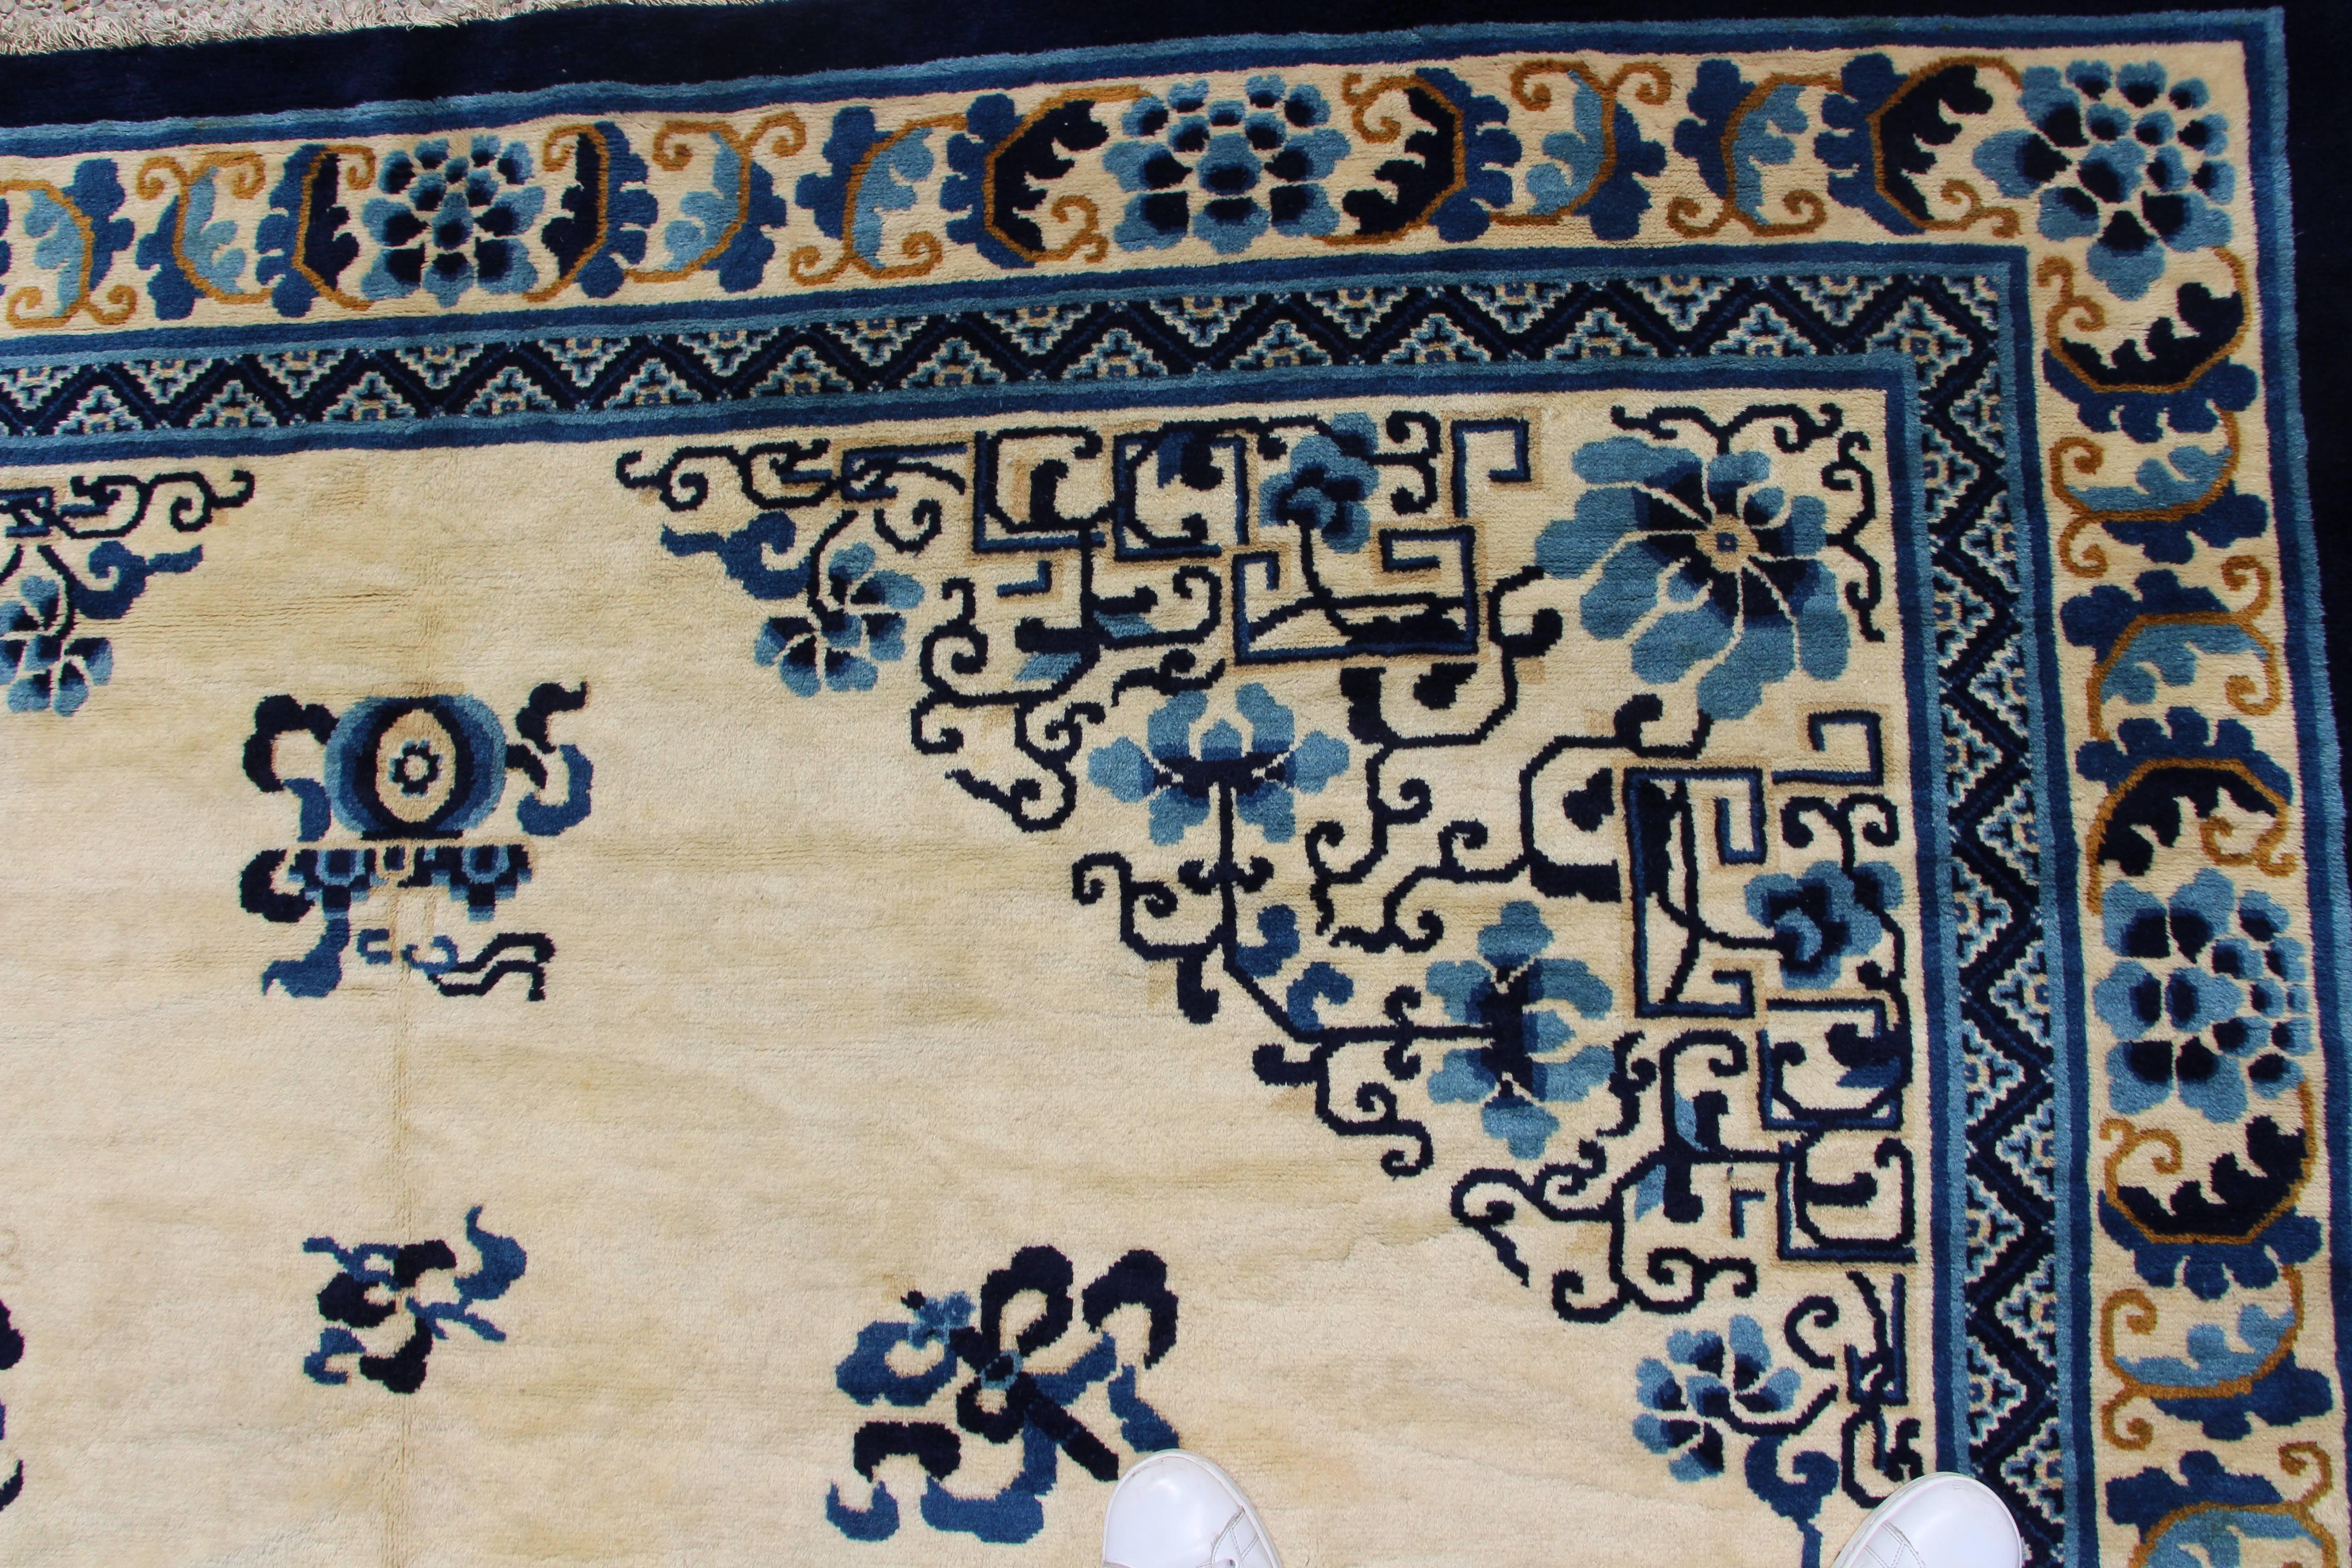 20th century Chinese rug extra fine quality,
circa 1950.
Beige and blue.